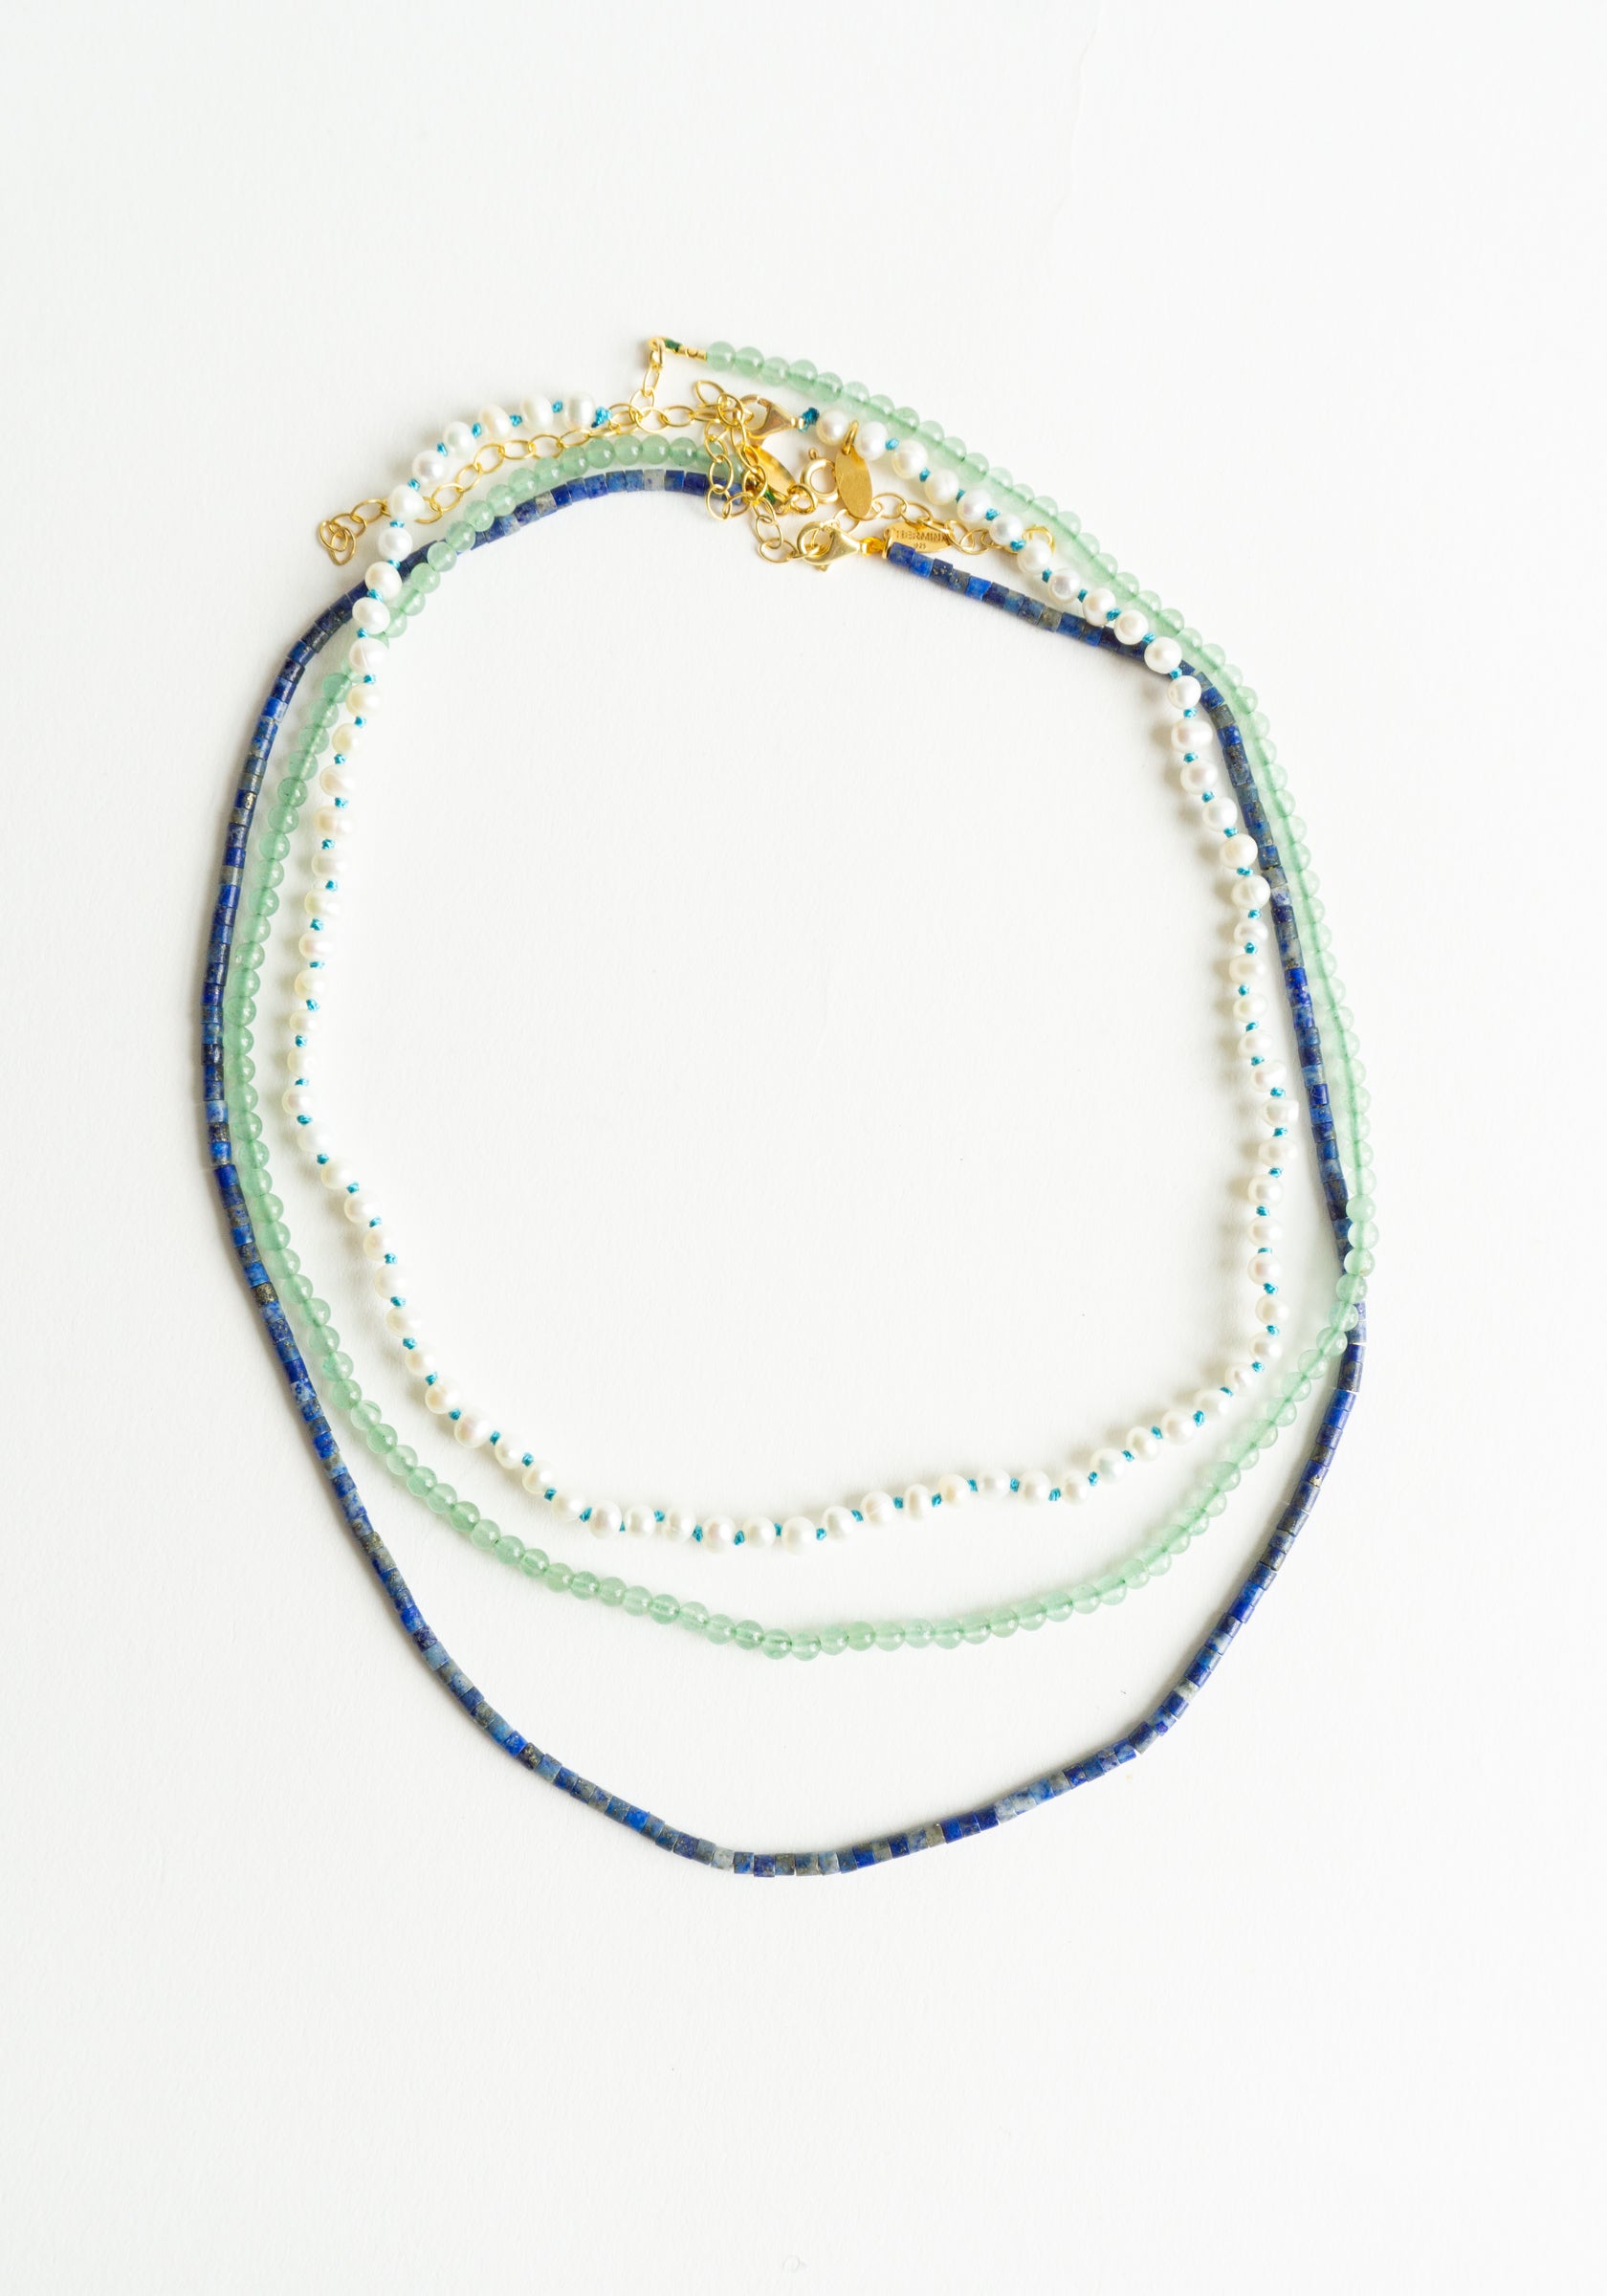 Hermina Athens Wizard of Pearls Knotted Necklace in Turquoise